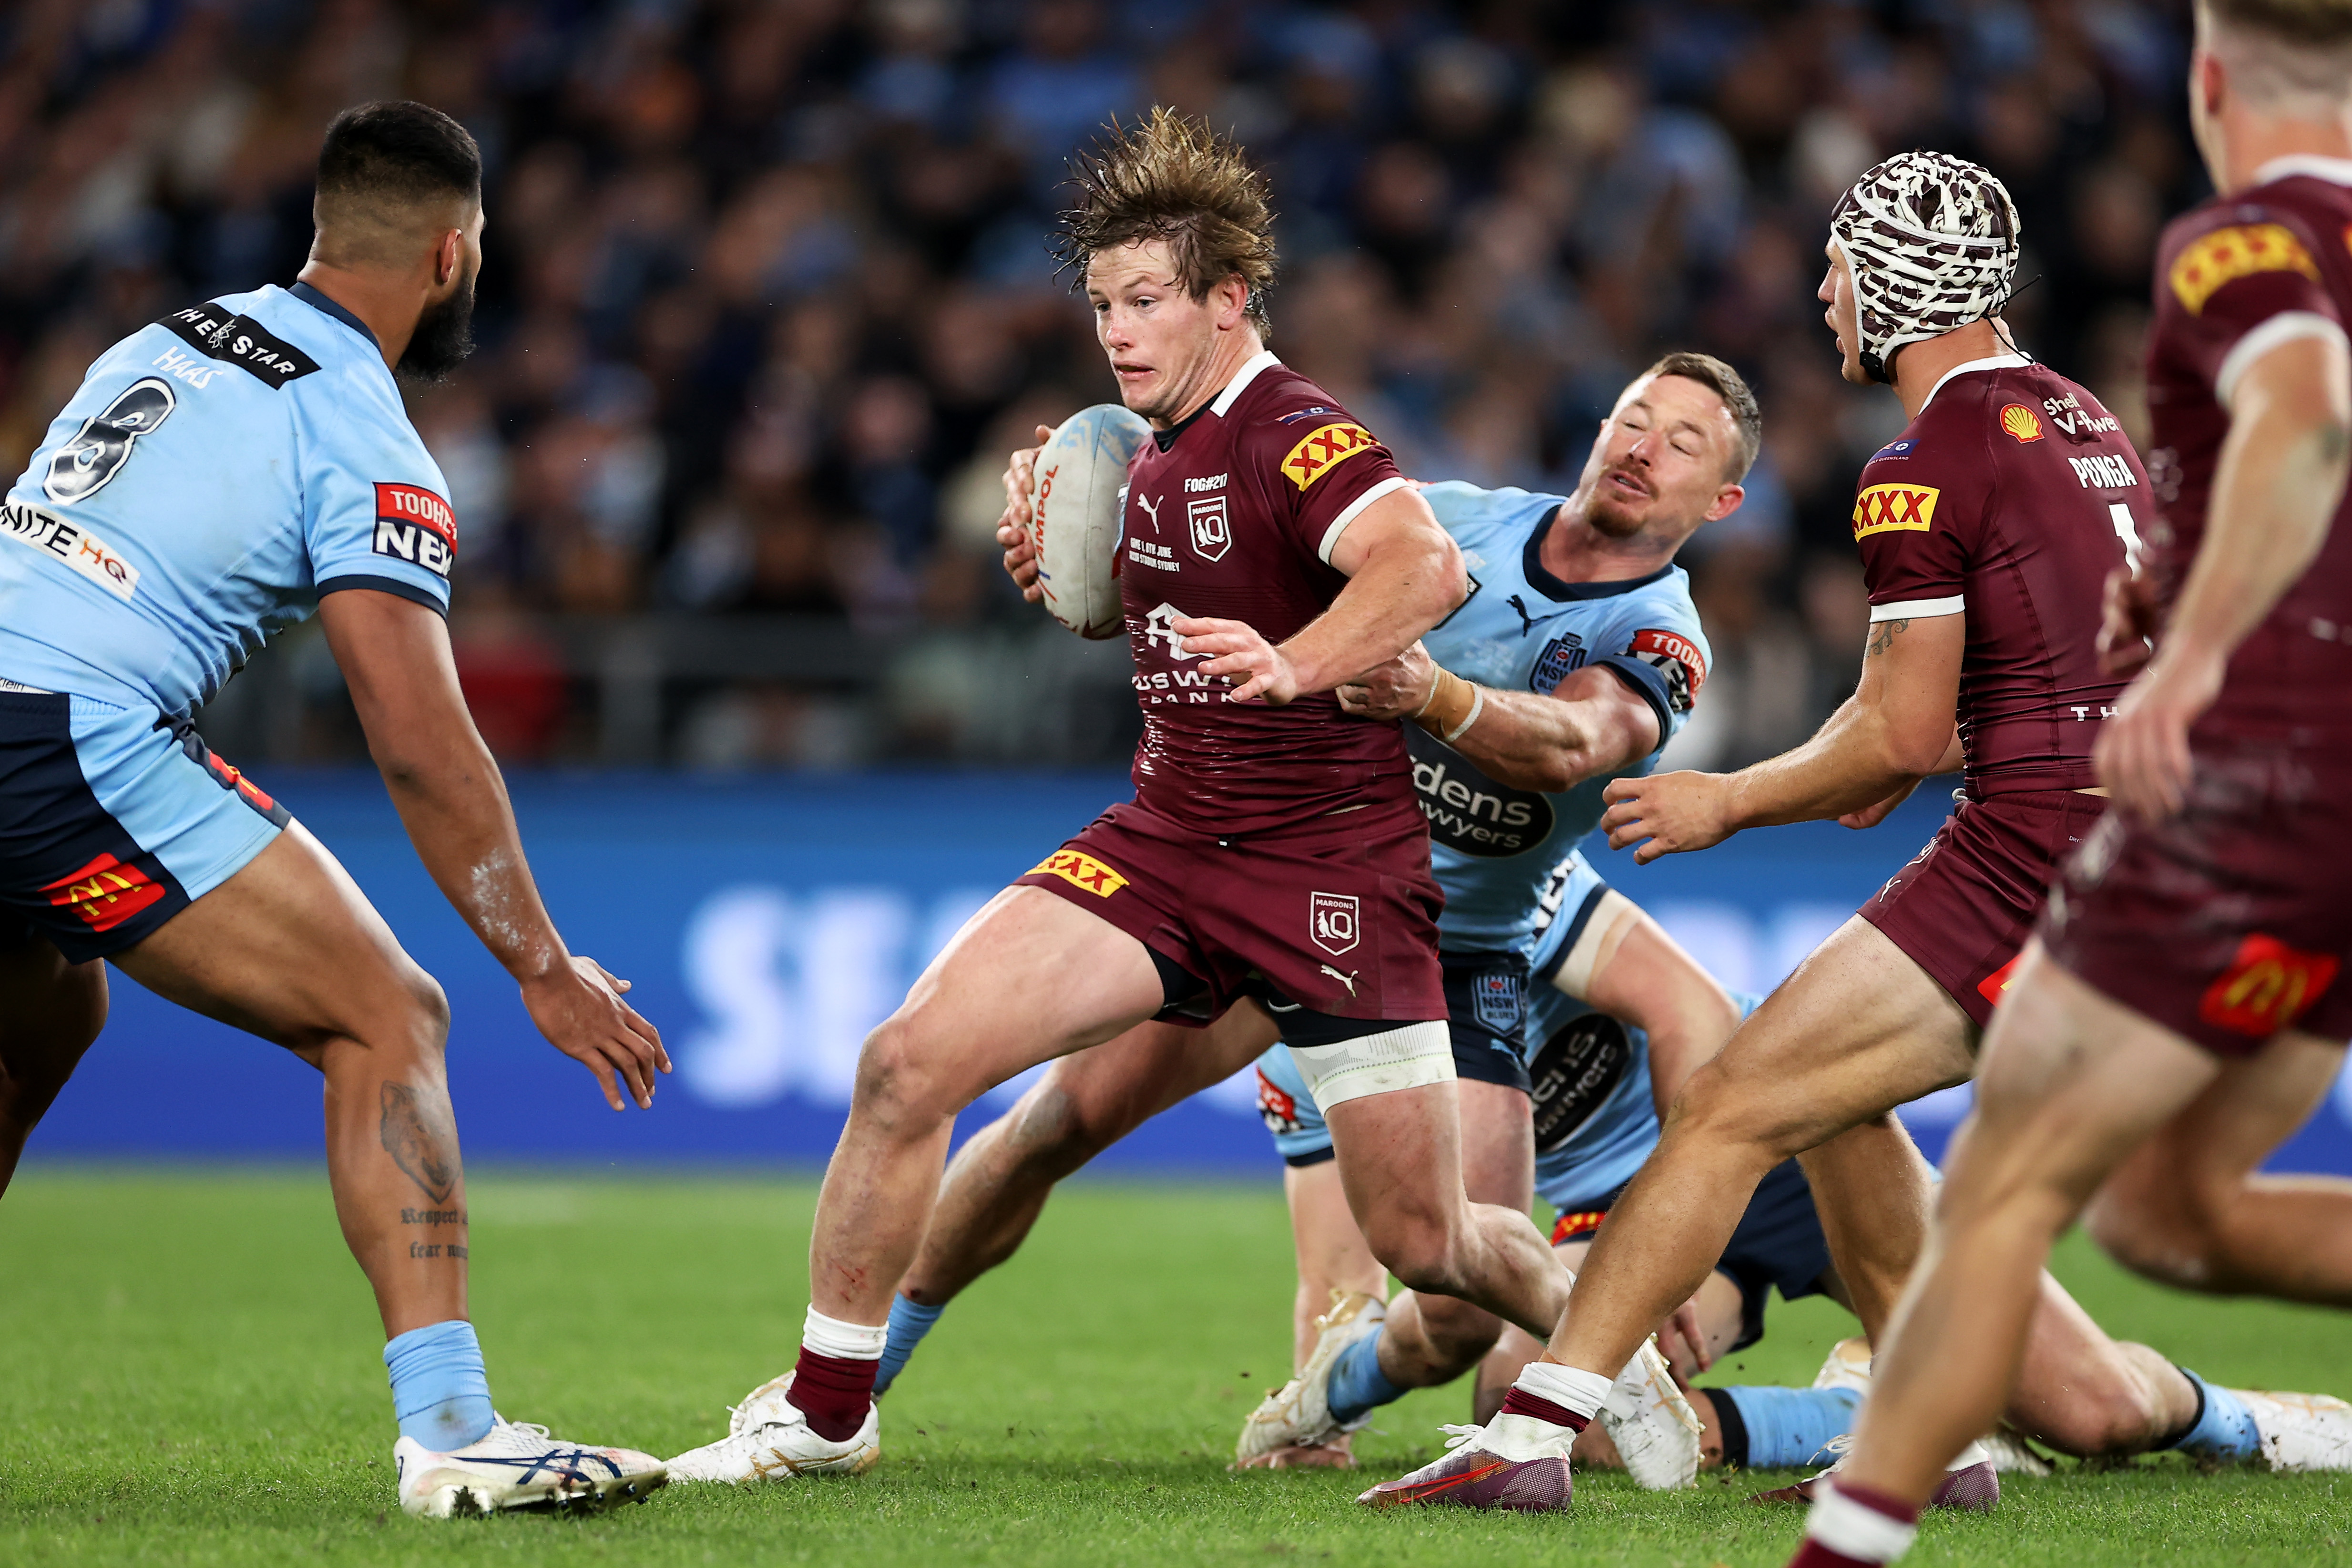 Harry Grant of the Maroons is tackled during game one of the 2022 State of Origin series between the New South Wales Blues and the Queensland Maroons at Accor Stadium on June 08, 2022, in Sydney, Australia. (Photo by Mark Kolbe/Getty Images)